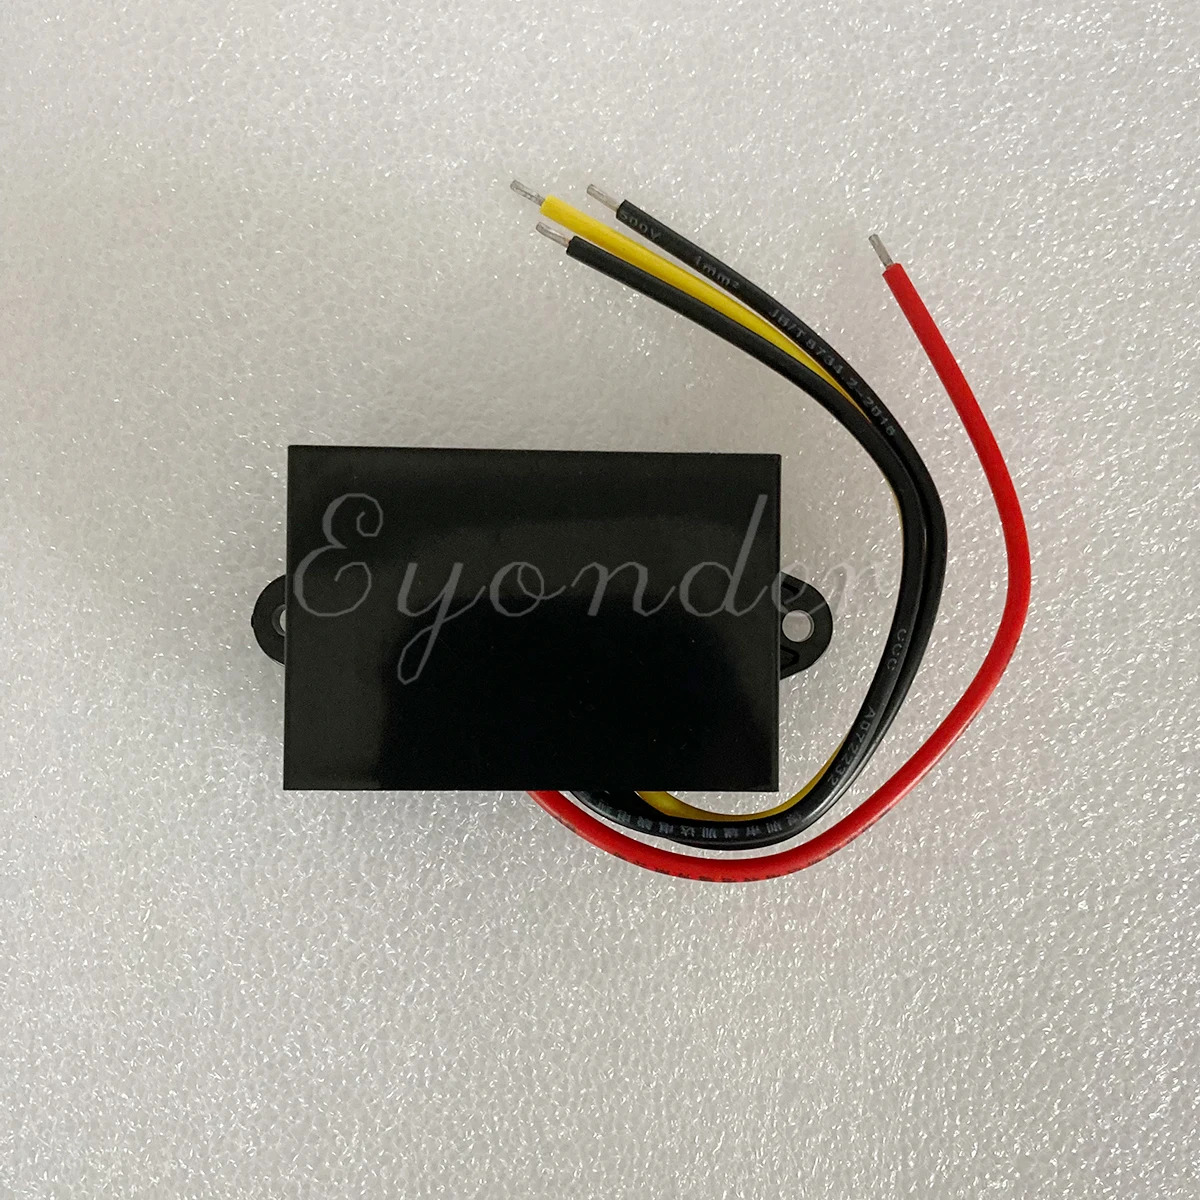 Eyonder Input 5~10v 6v 7v 8v 9v 10v 5v to 12v 1a 2a dc dc step up converter 12w 24w dc to dc boost power supply module 3a 36w